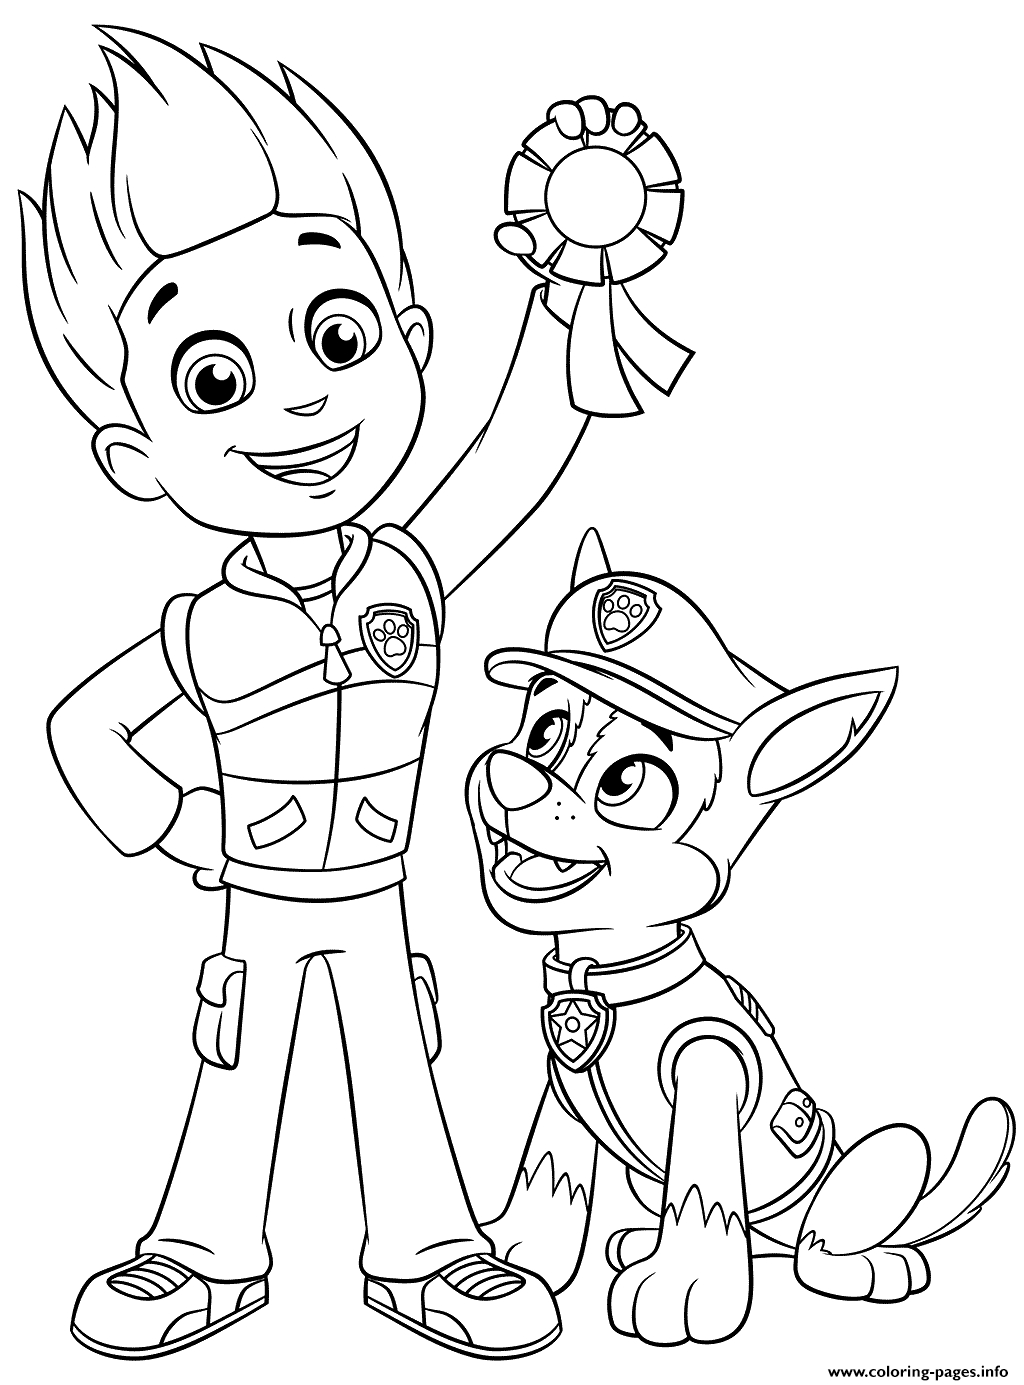 Chase Paw Patrol Coloring Pages Printable - Paw Patrol Colouring Pages concernant Chase Dessin